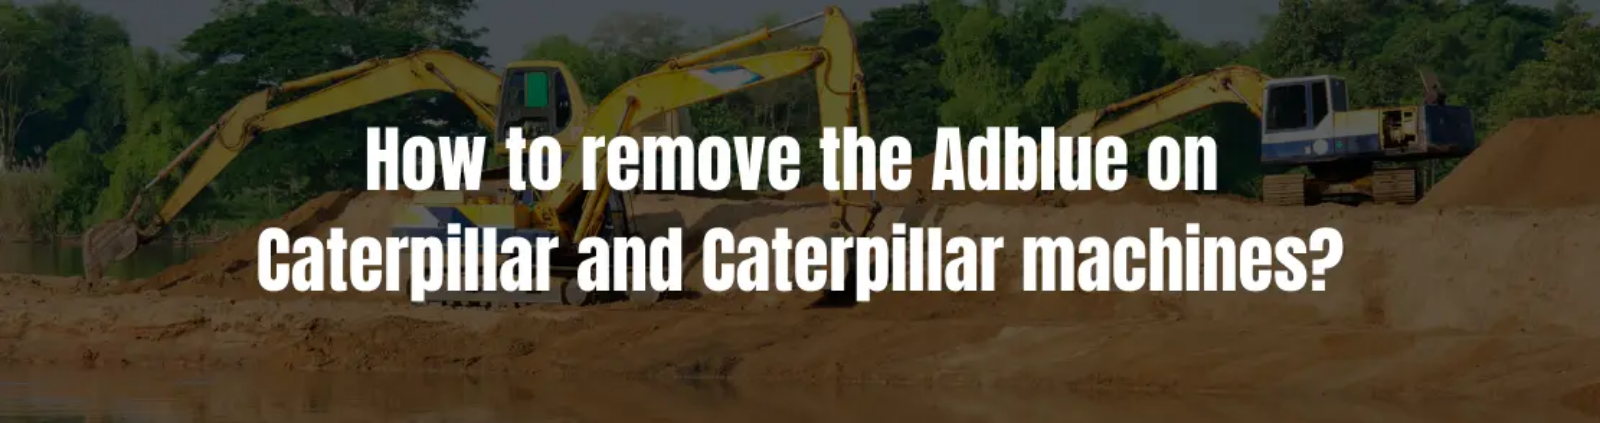 How to remove the Adblue on Caterpillar and Caterpillar machines?